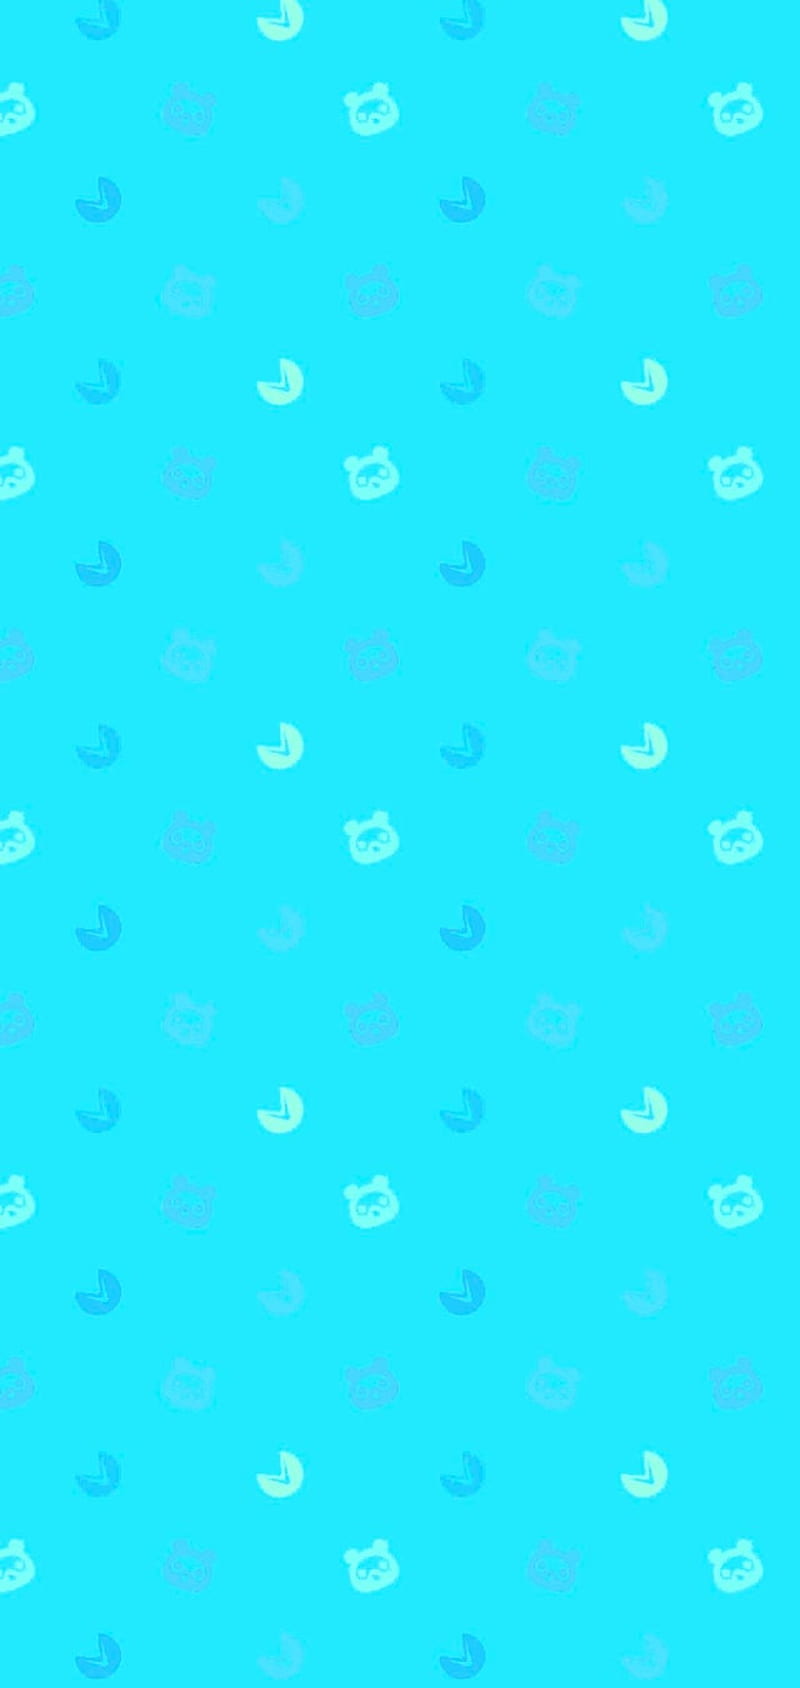 Here Is The Cyan As Requested. Once Again Enjoy. : R AnimalCrossing, Cute Cyan, HD phone wallpaper